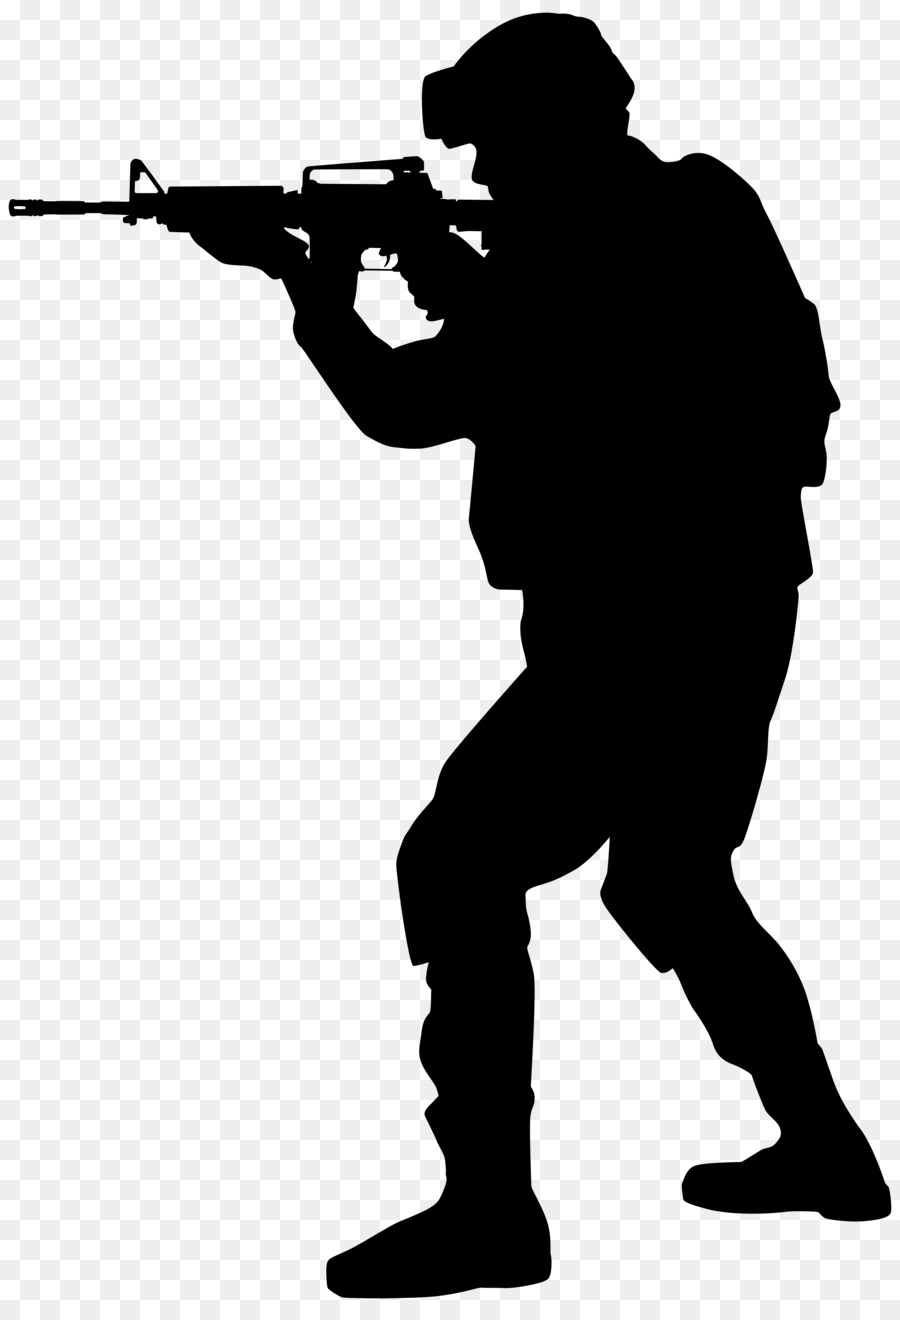 Silhouette Soldier Army Clip art - Soldier Silhouette Cliparts png download - 5492*8000 - Free Transparent Silhouette png Download.